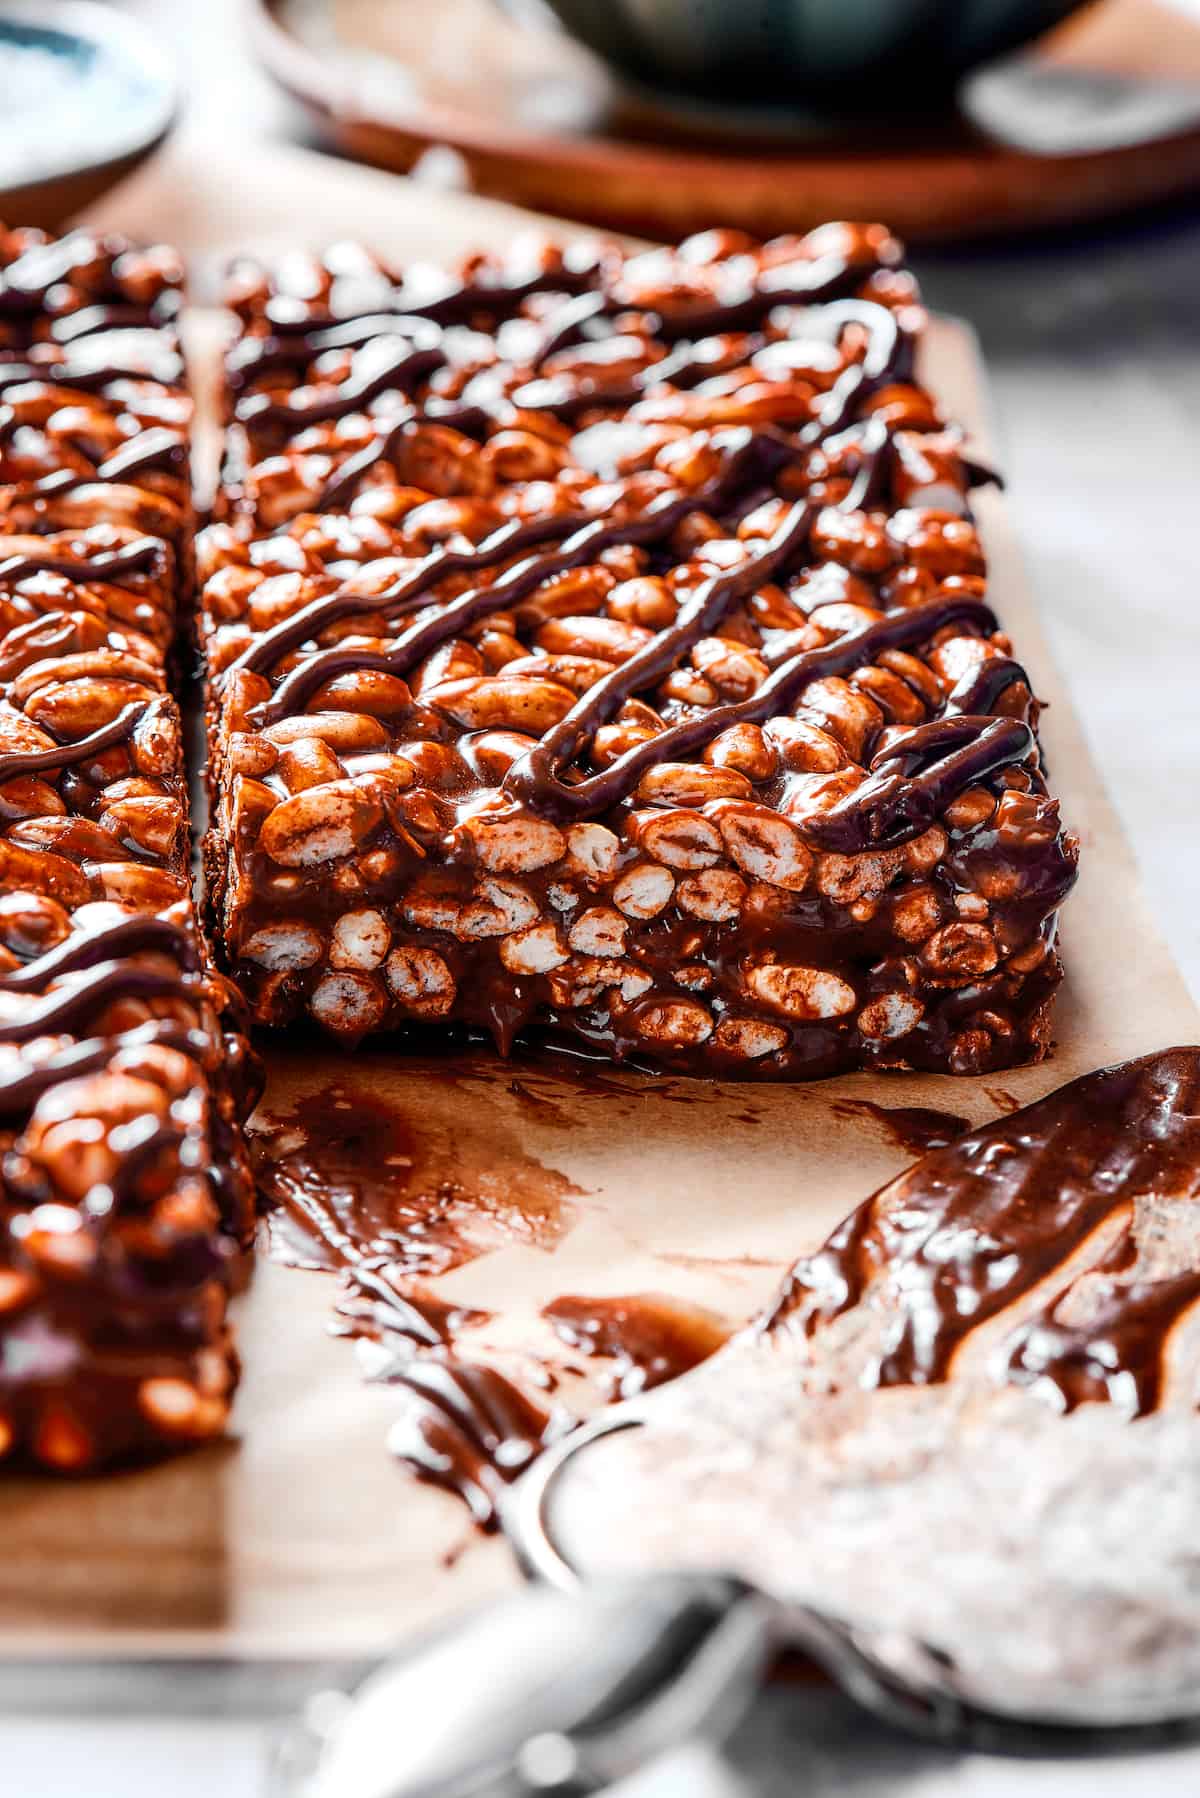 Squares of chocolate cereal bar with chocolate and marshmallow topping.